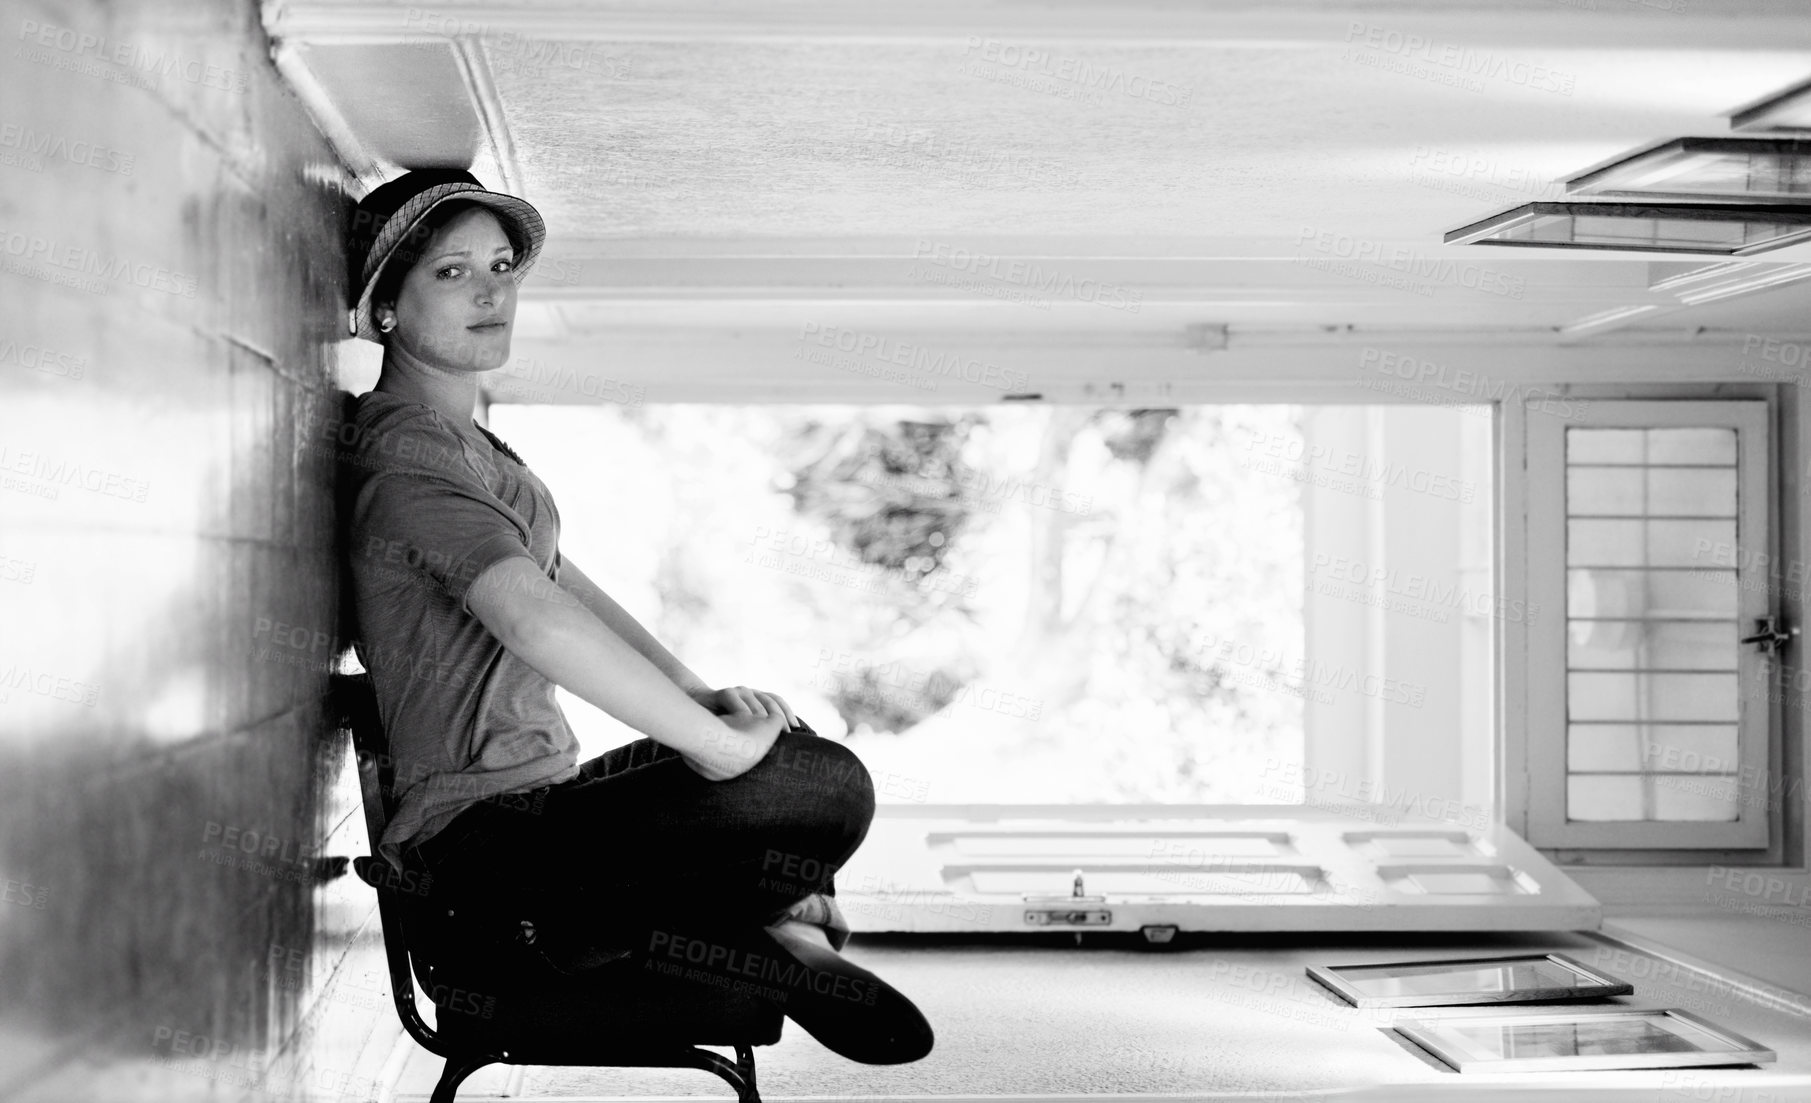 Buy stock photo A woman sitting on a chair inside her house with the house turned sideways - perspective